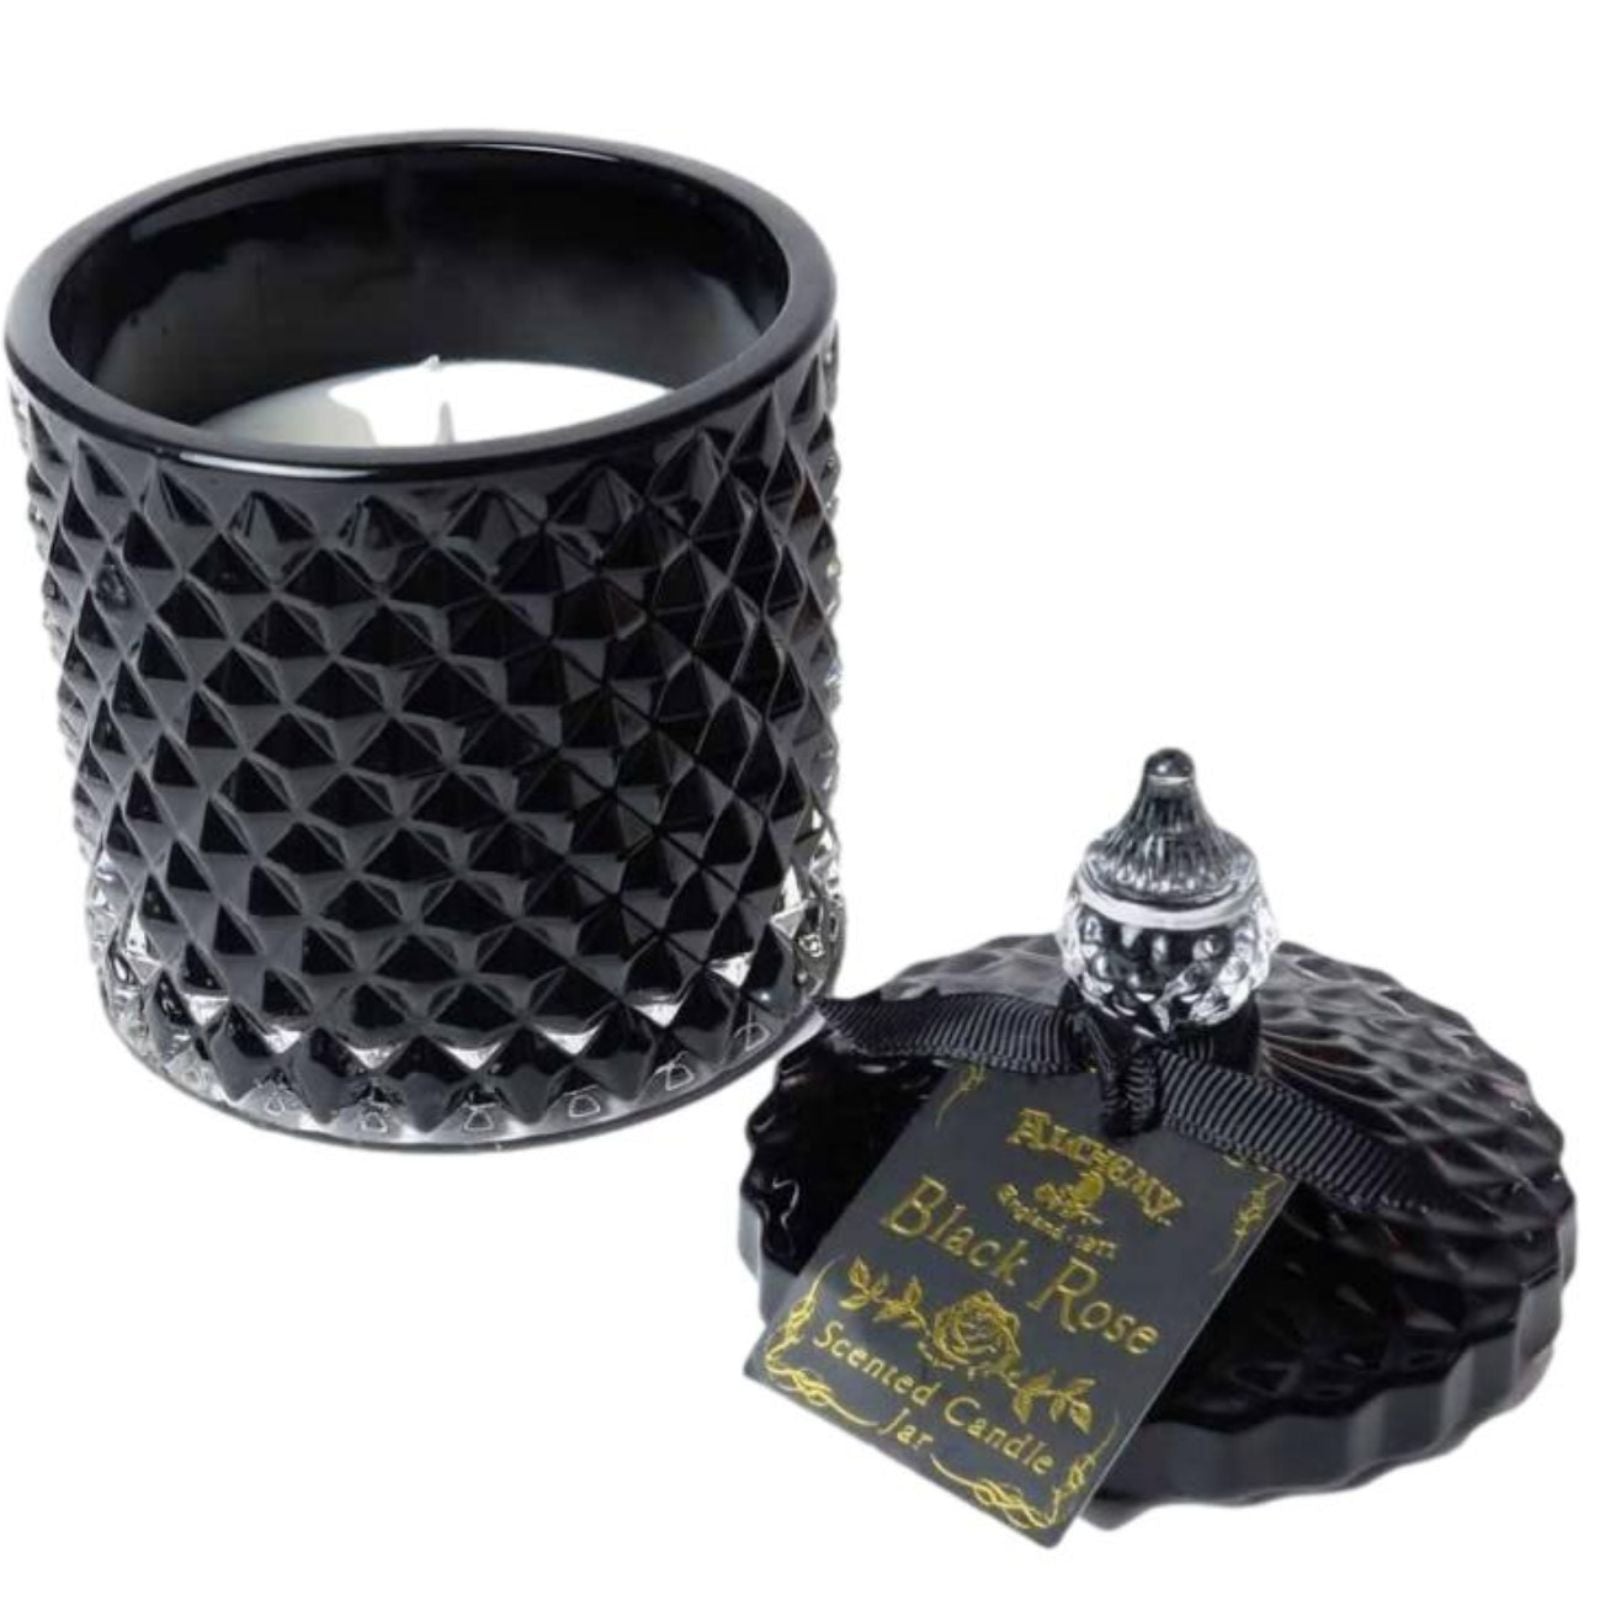 Alchemy England Scented Black Rose Round Candle Jar (Large)